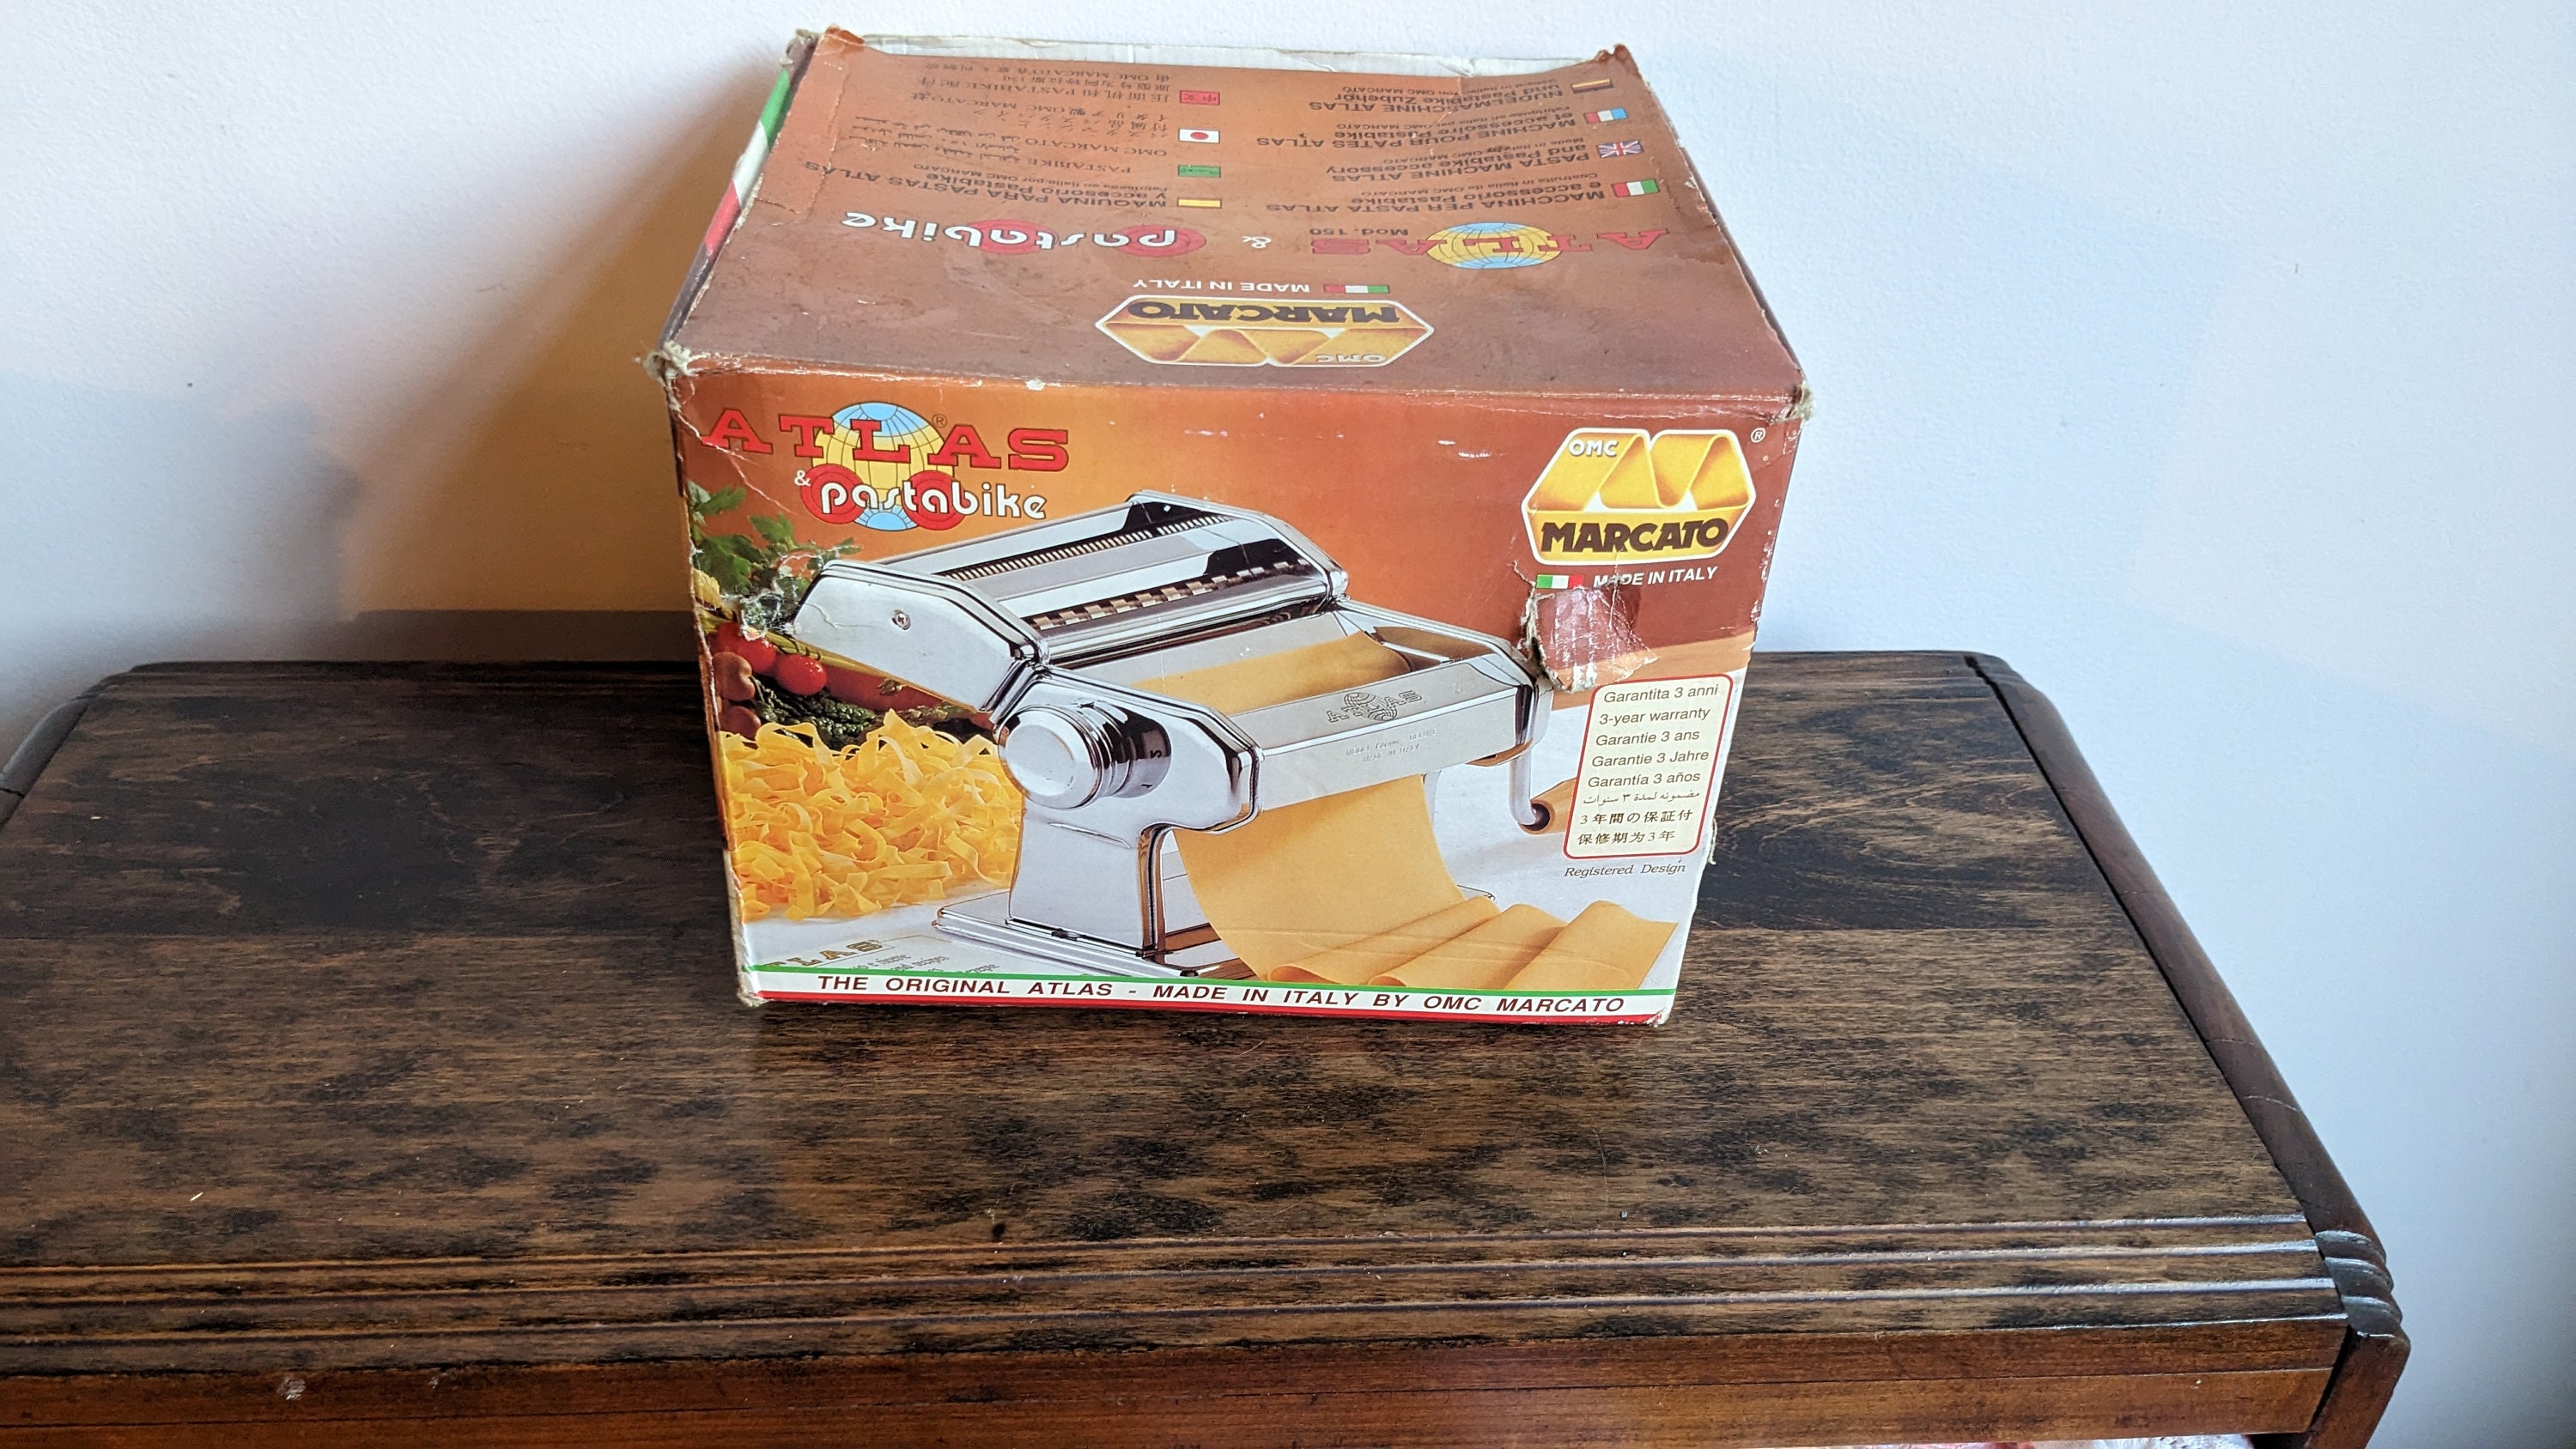 MARCATO ATLAS 150 PASTA MACHINE With Box & Book VINTAGE MADE IN